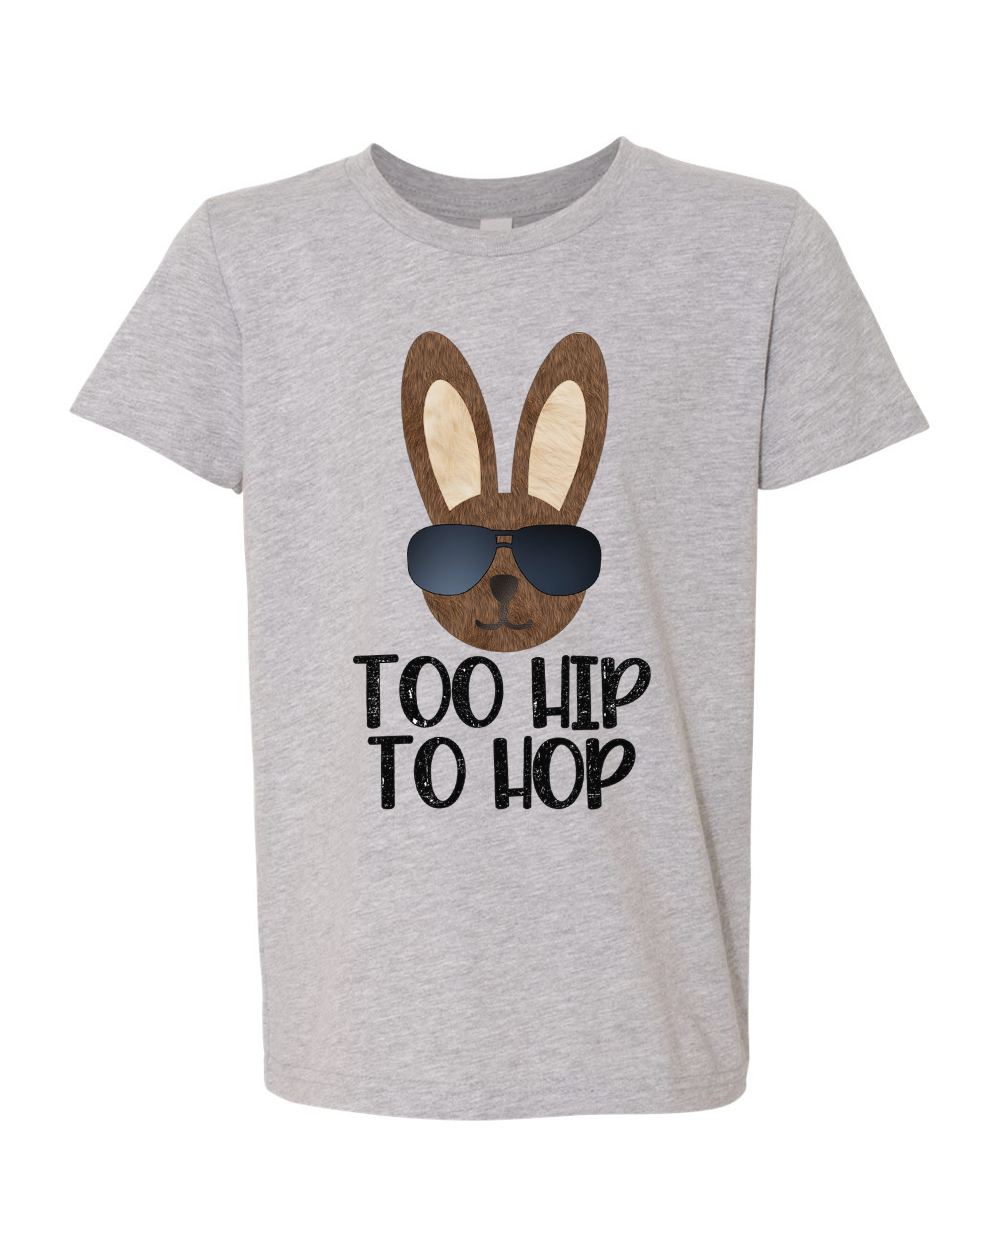 Too Hip To Hop Shirt Boys Easter Day Tee